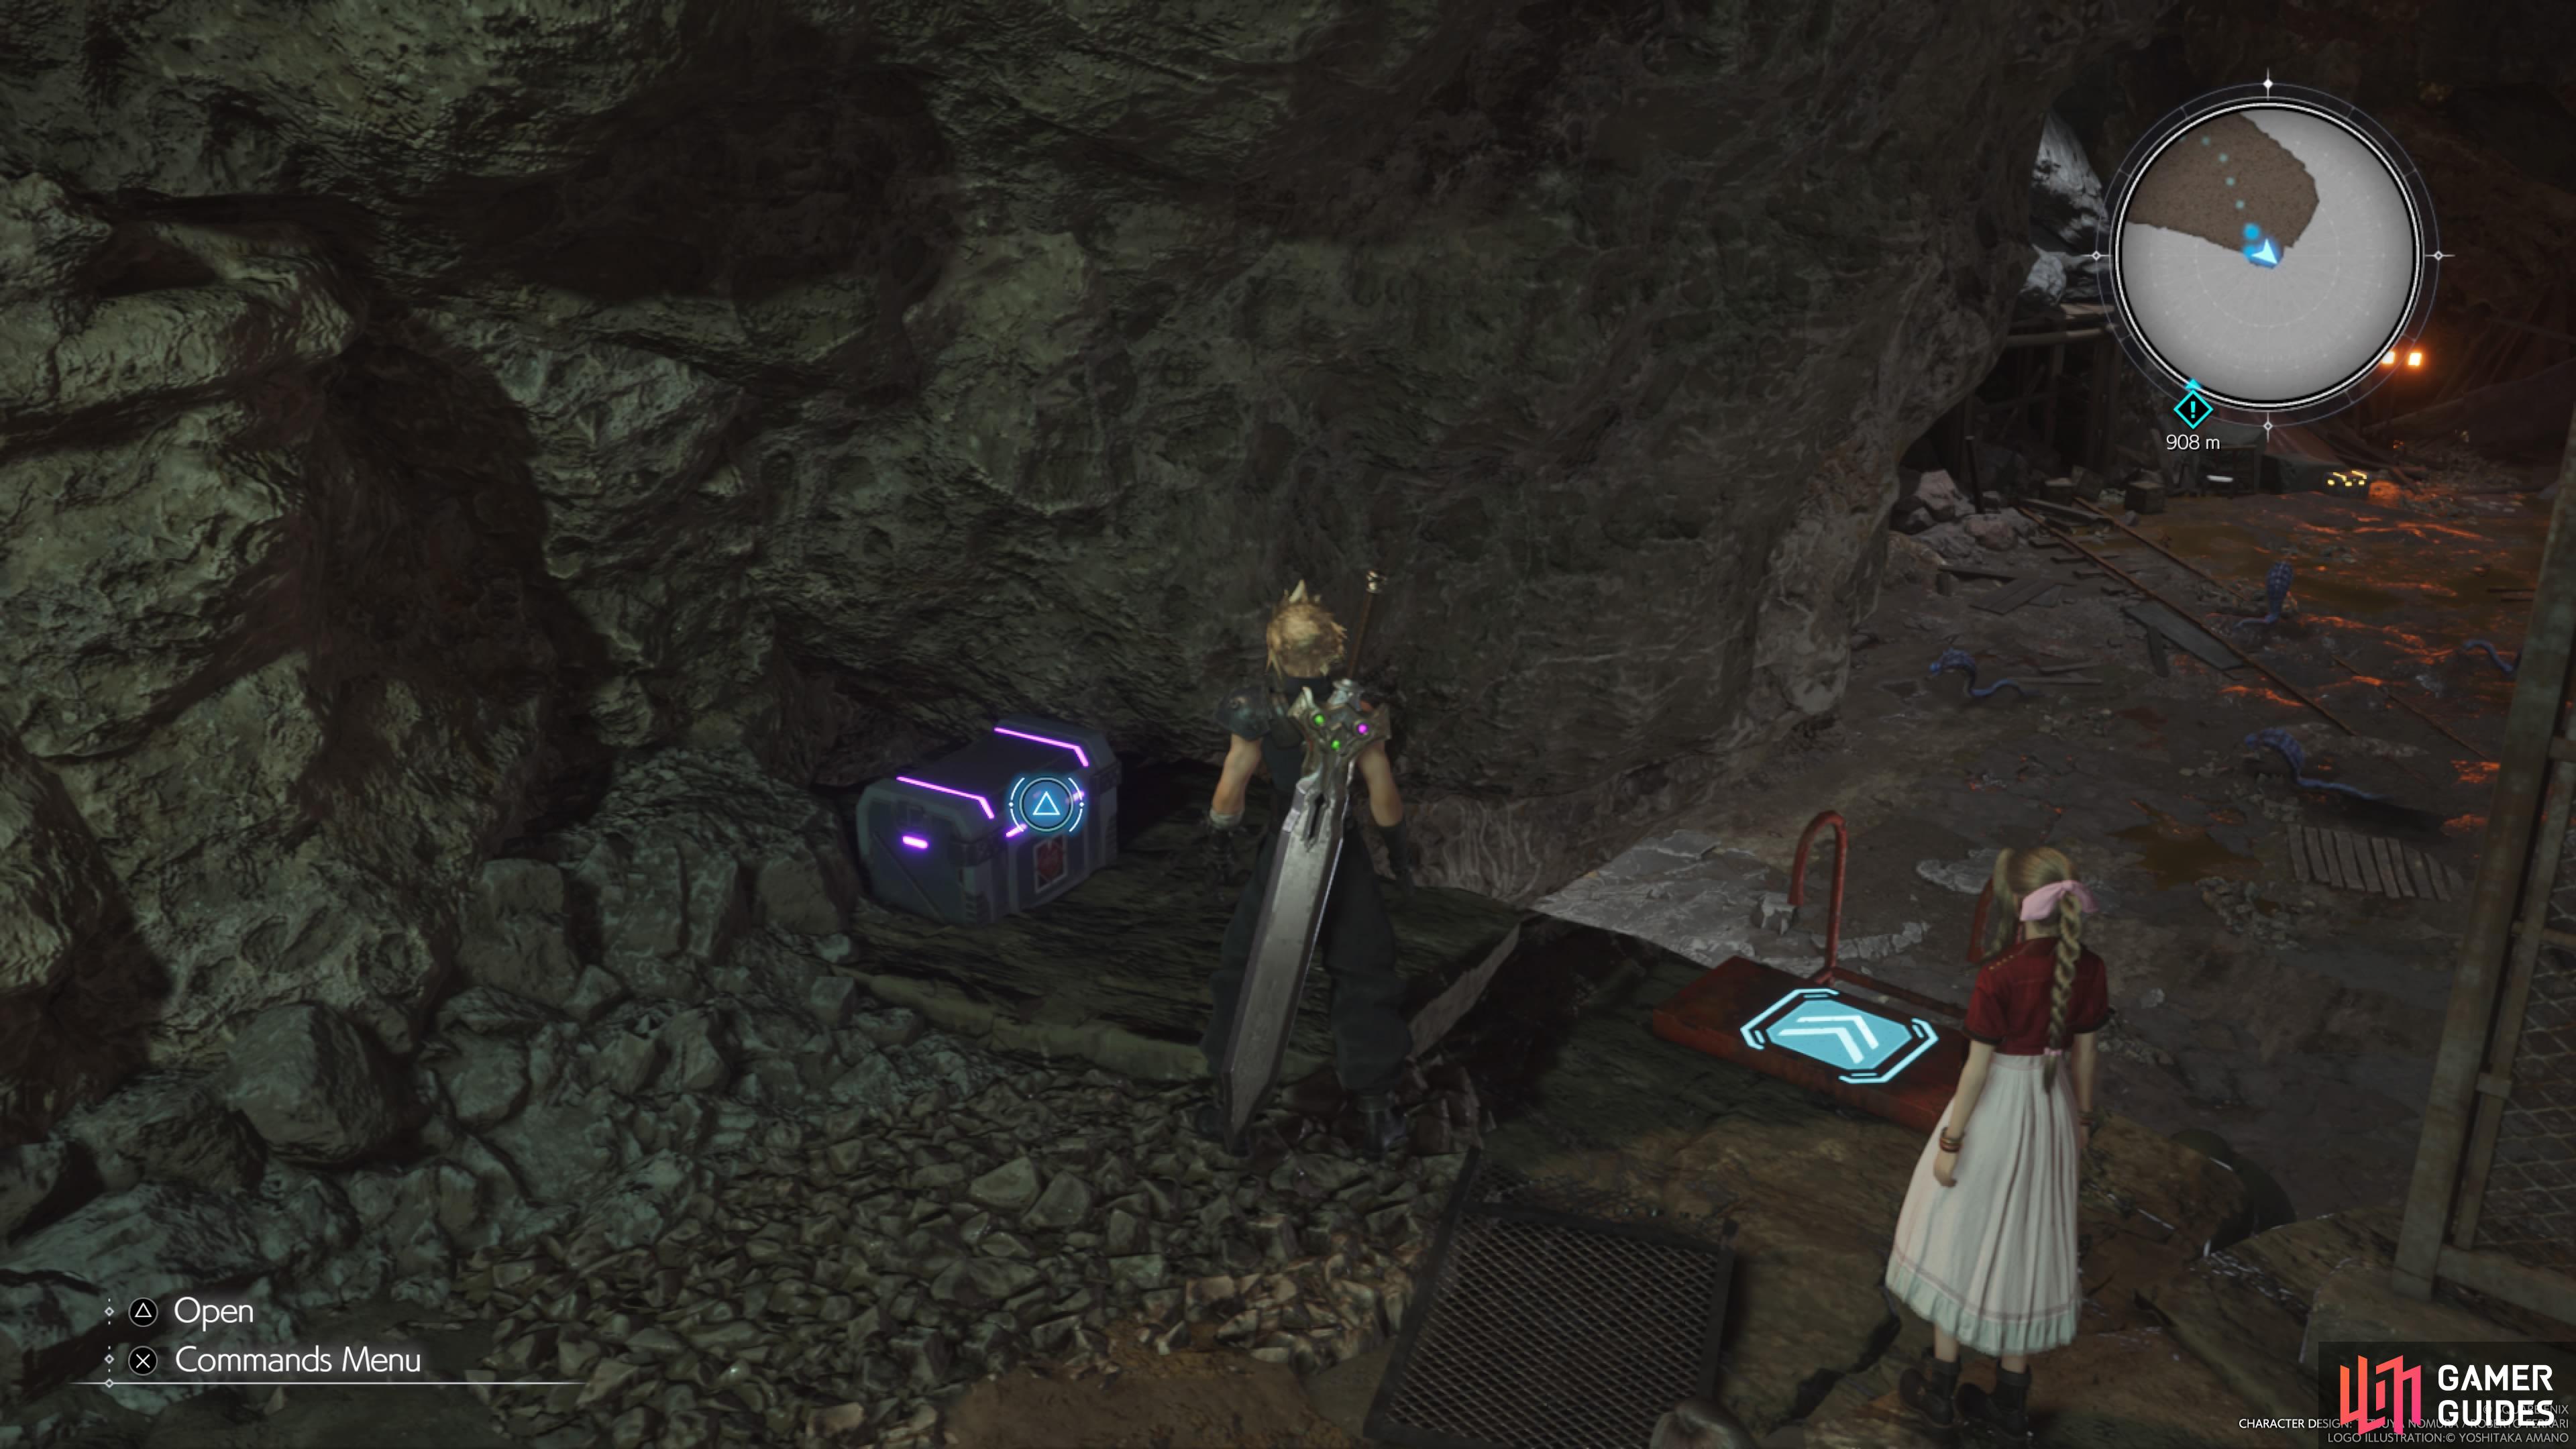 This purple chest right by the ladder will contain the Sylph Gloves for Tifa.